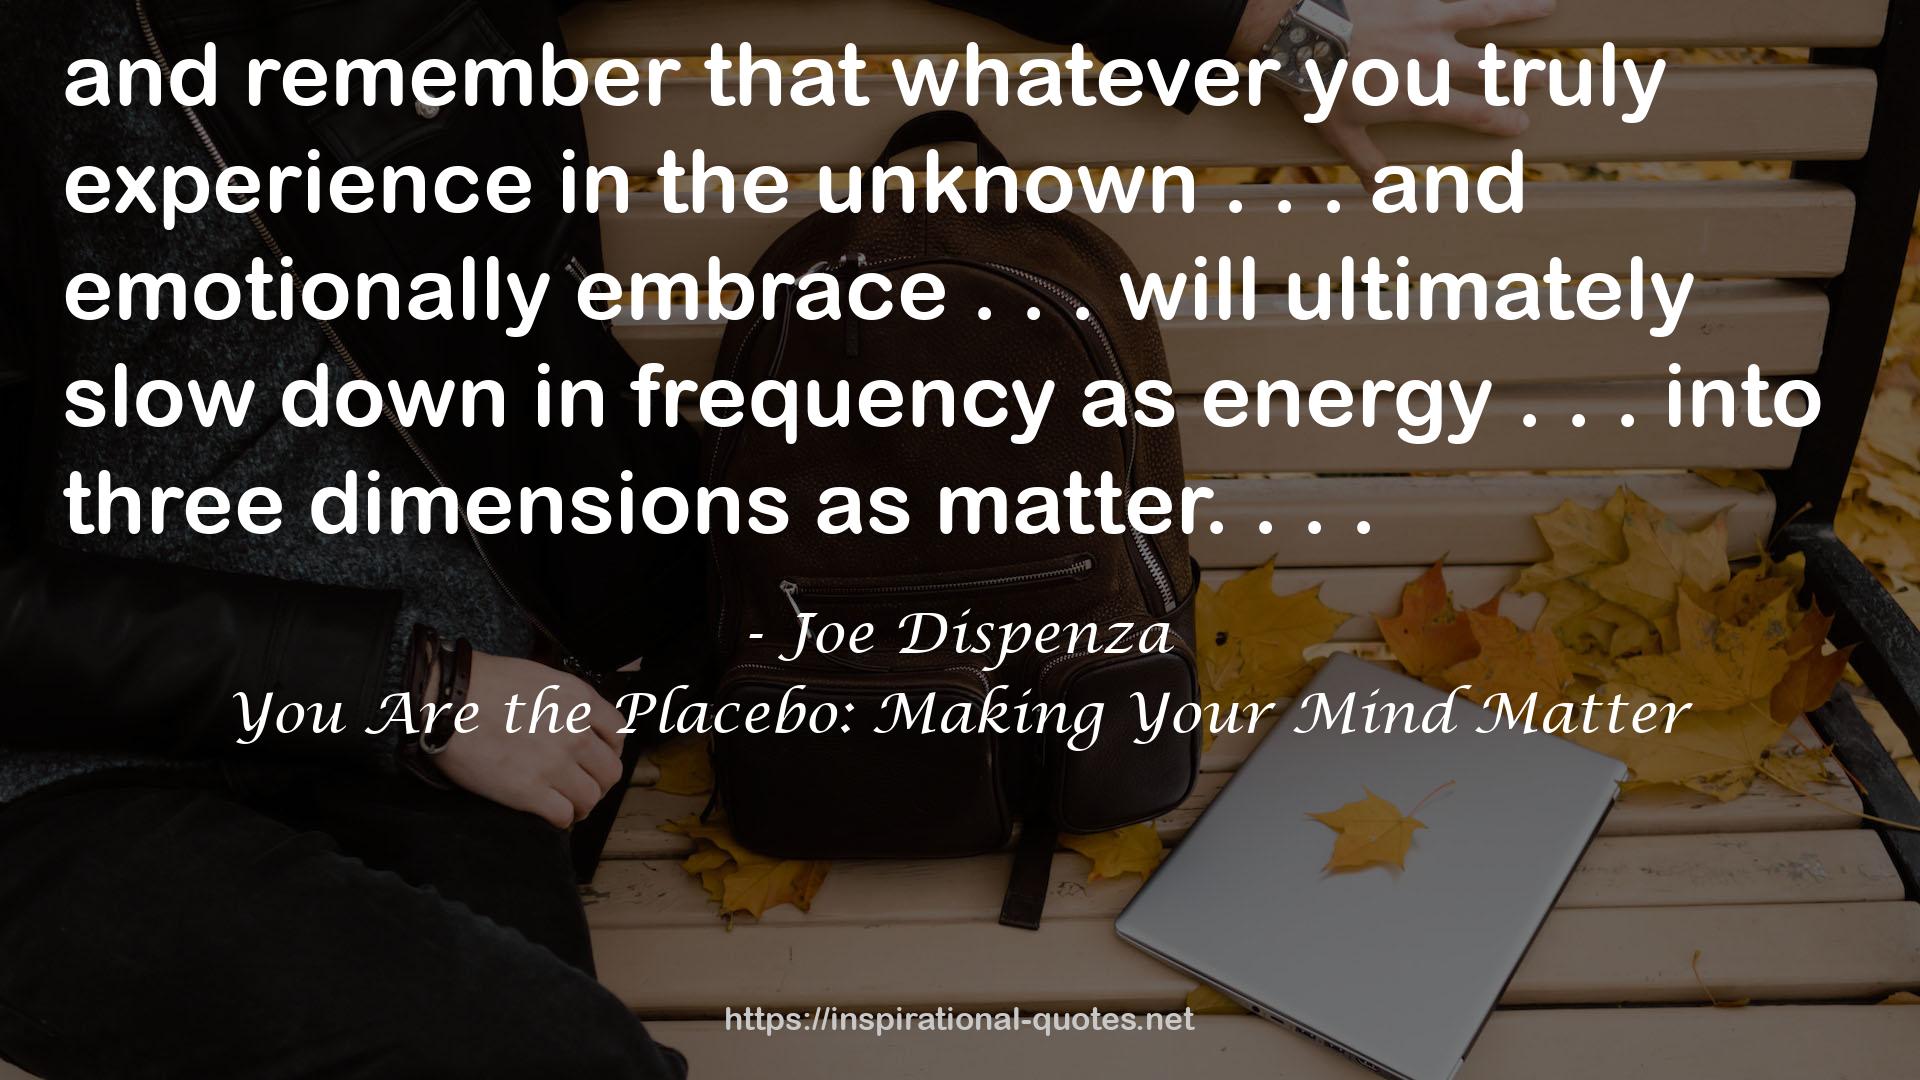 You Are the Placebo: Making Your Mind Matter QUOTES